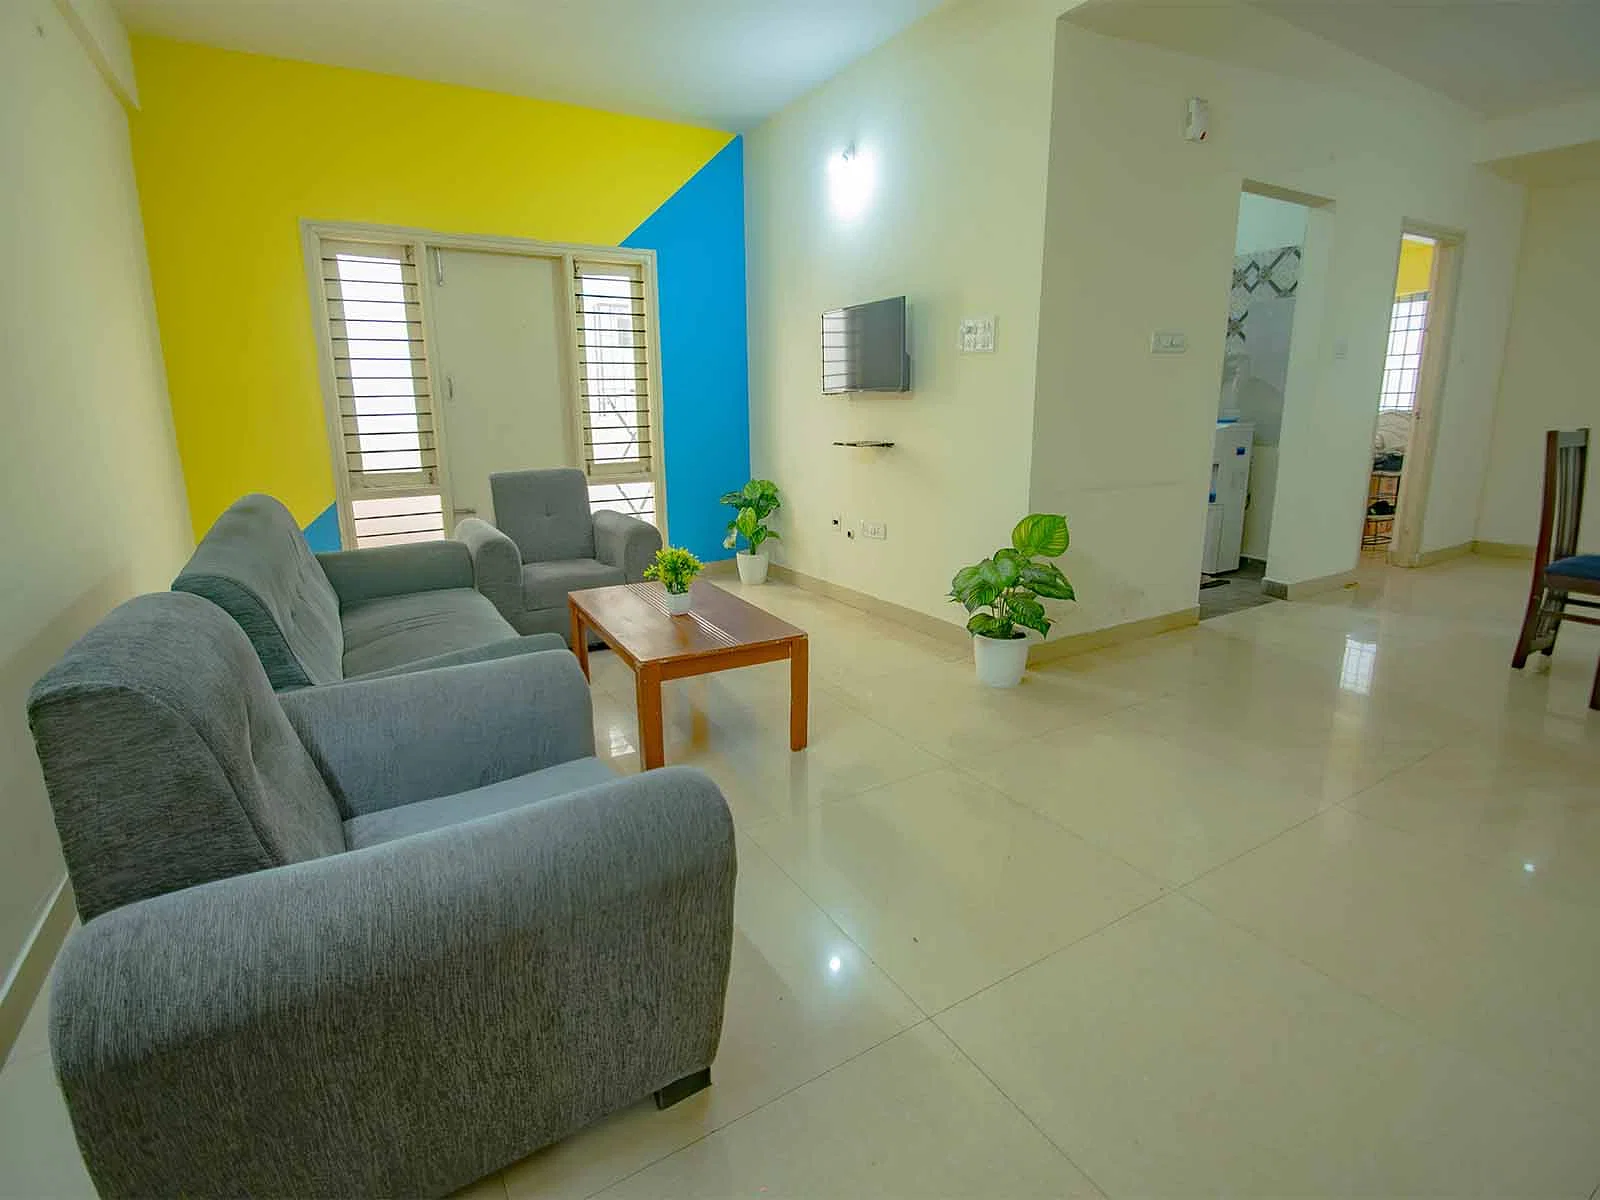 budget-friendly PGs and hostels for unisex with single rooms with daily hopusekeeping-Zolo Cygnus